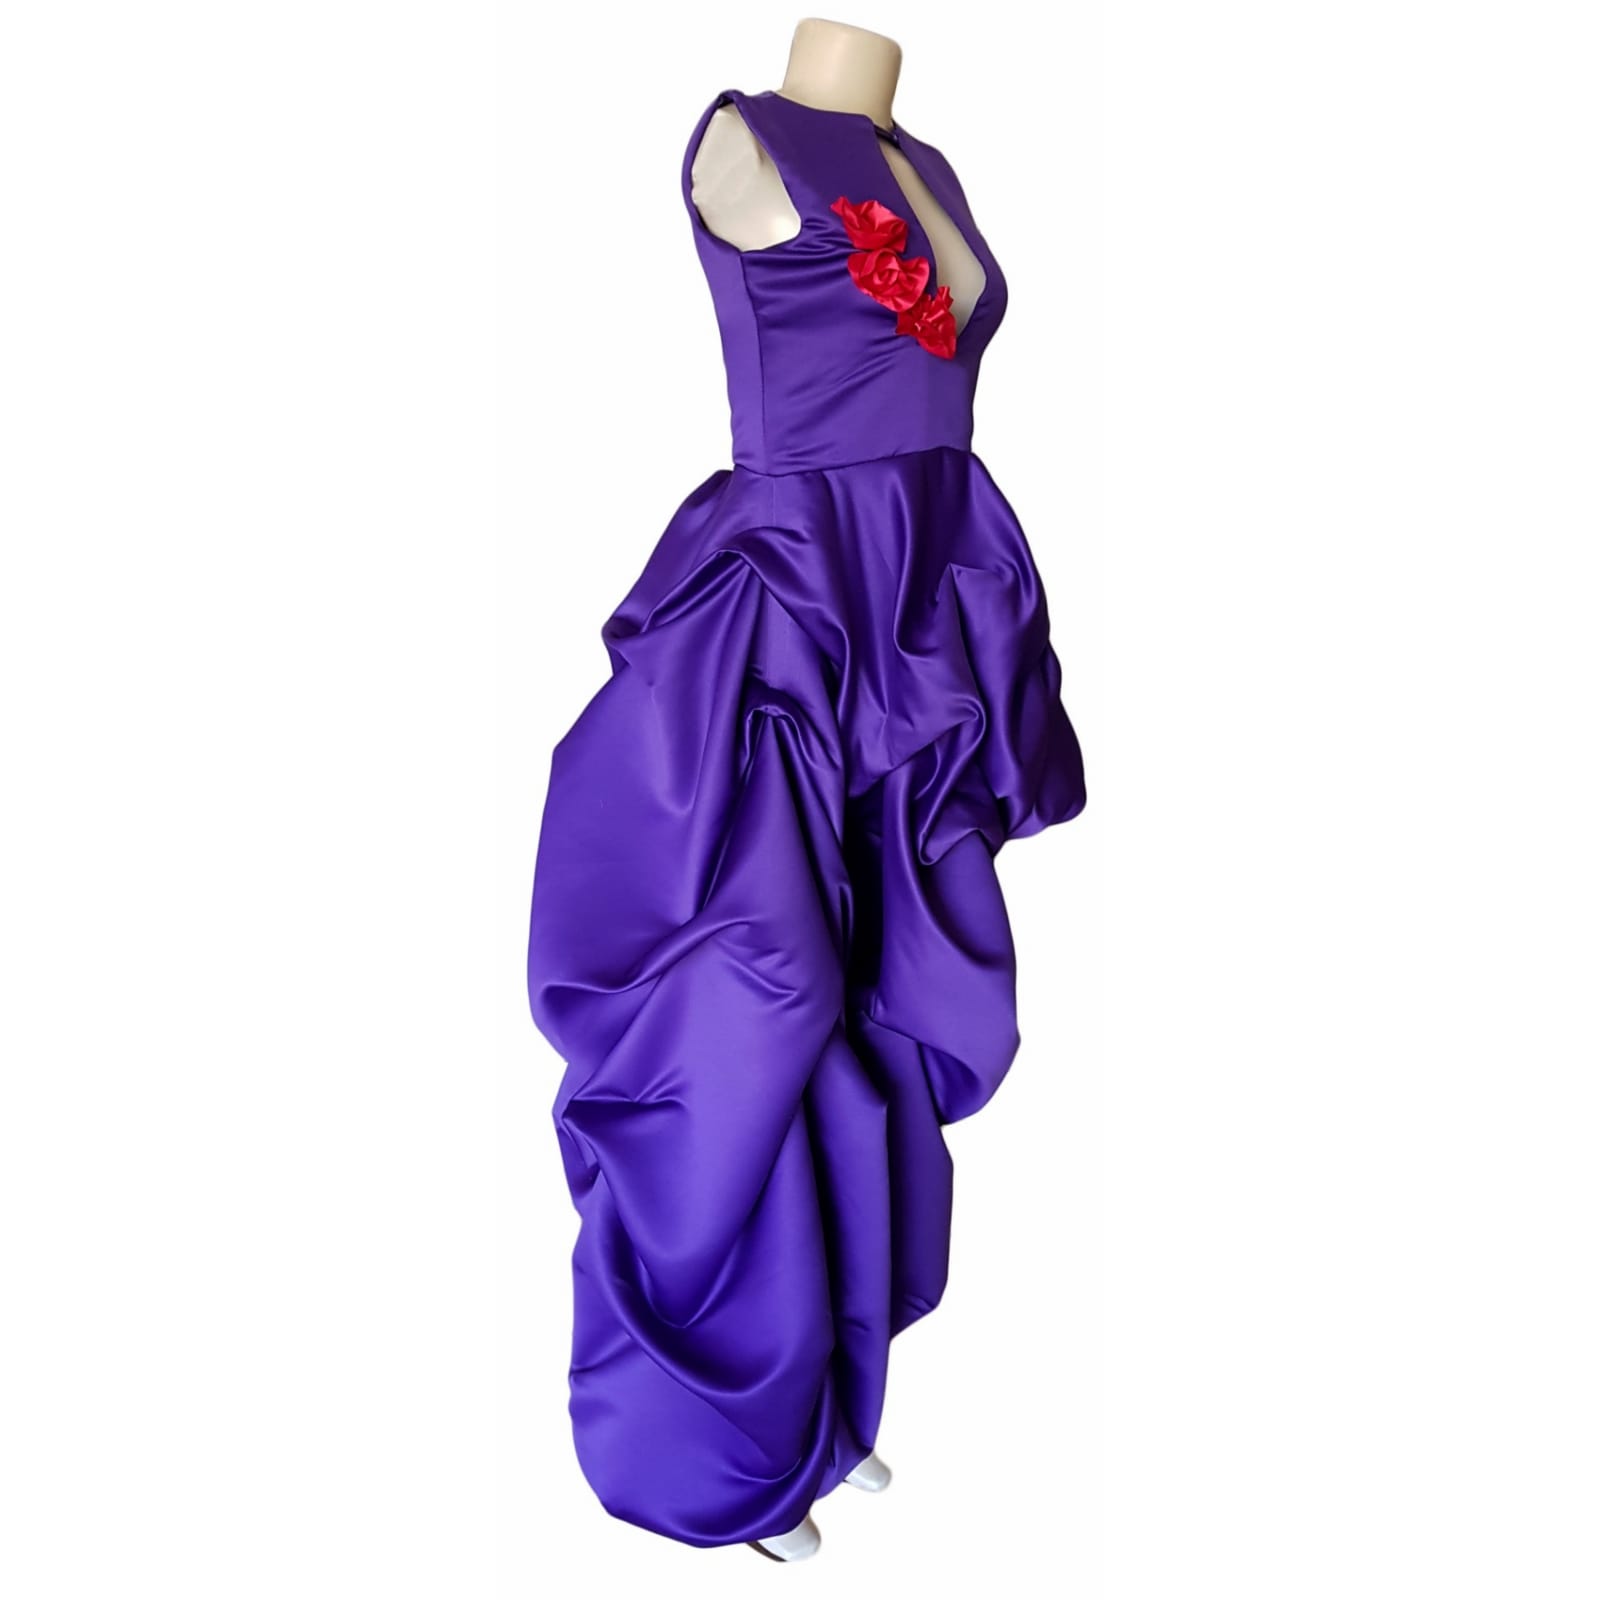 Purple and violet side high low prom dress 5 purple and violet side high low prom dress with a teardrop neckline and a diamond-shaped open back. With pull-ups lined with violet and red roses. Rose bust details.